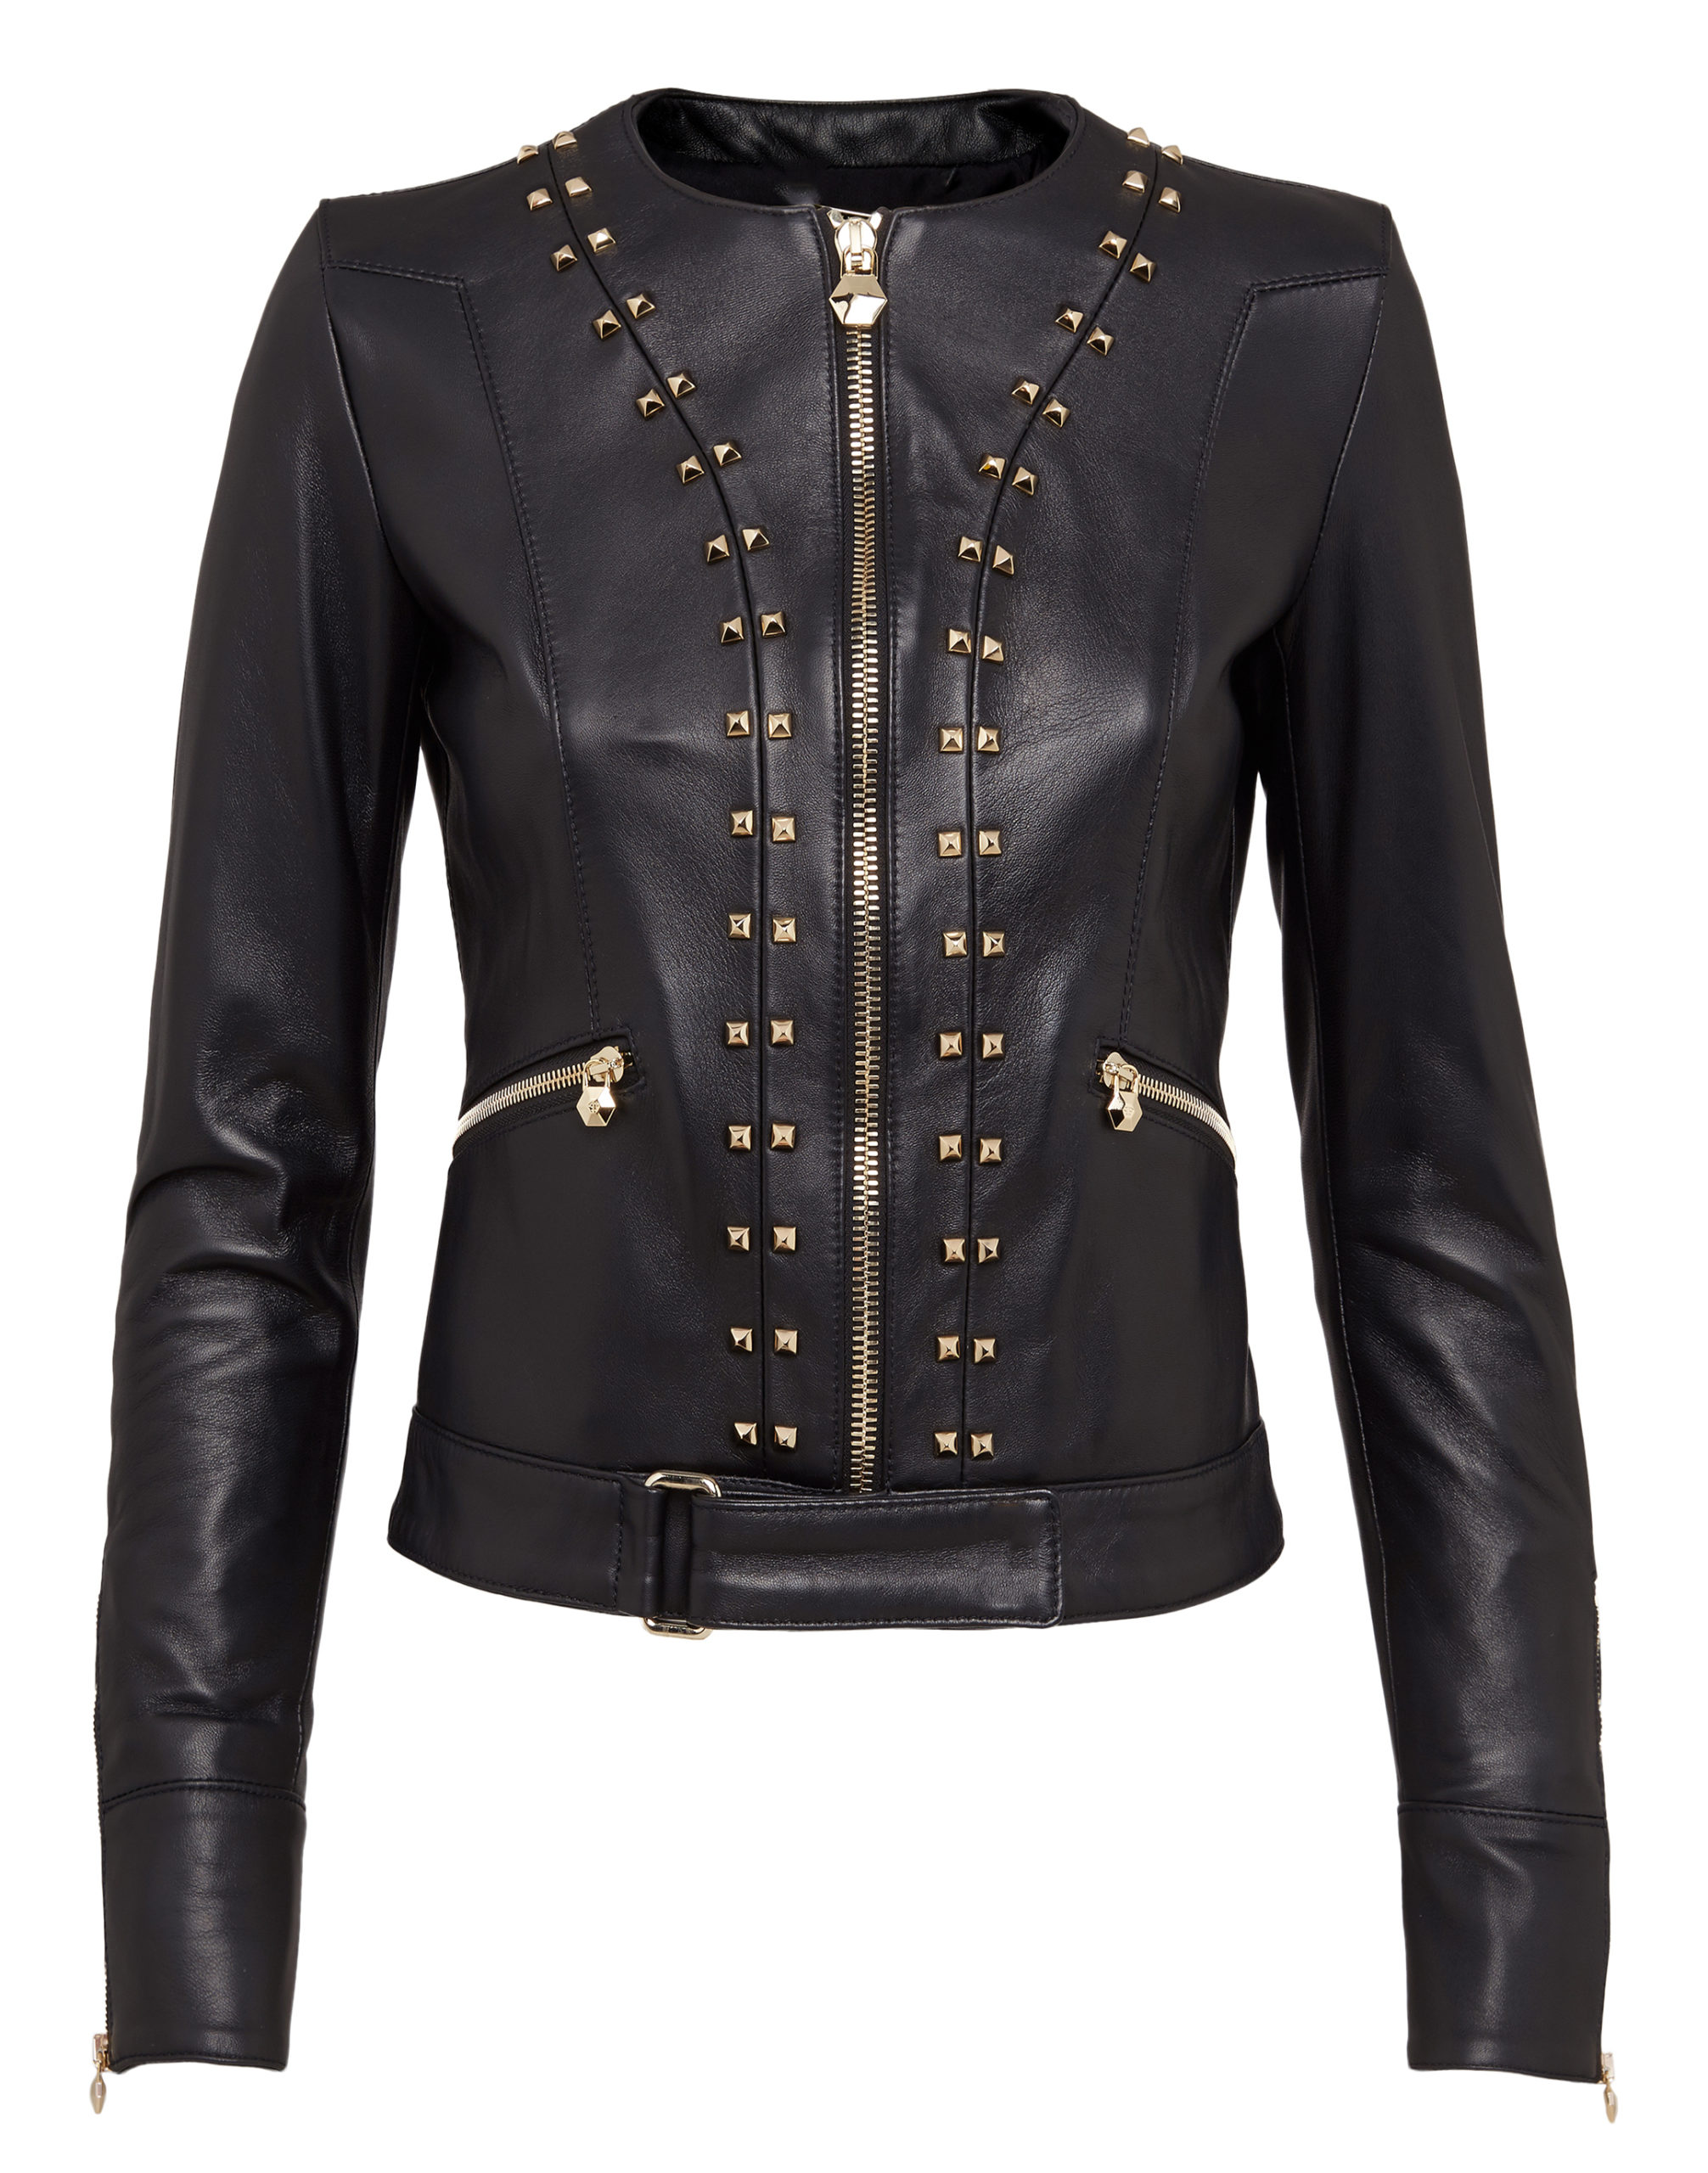 Black Leather Studded Jacket With Chains